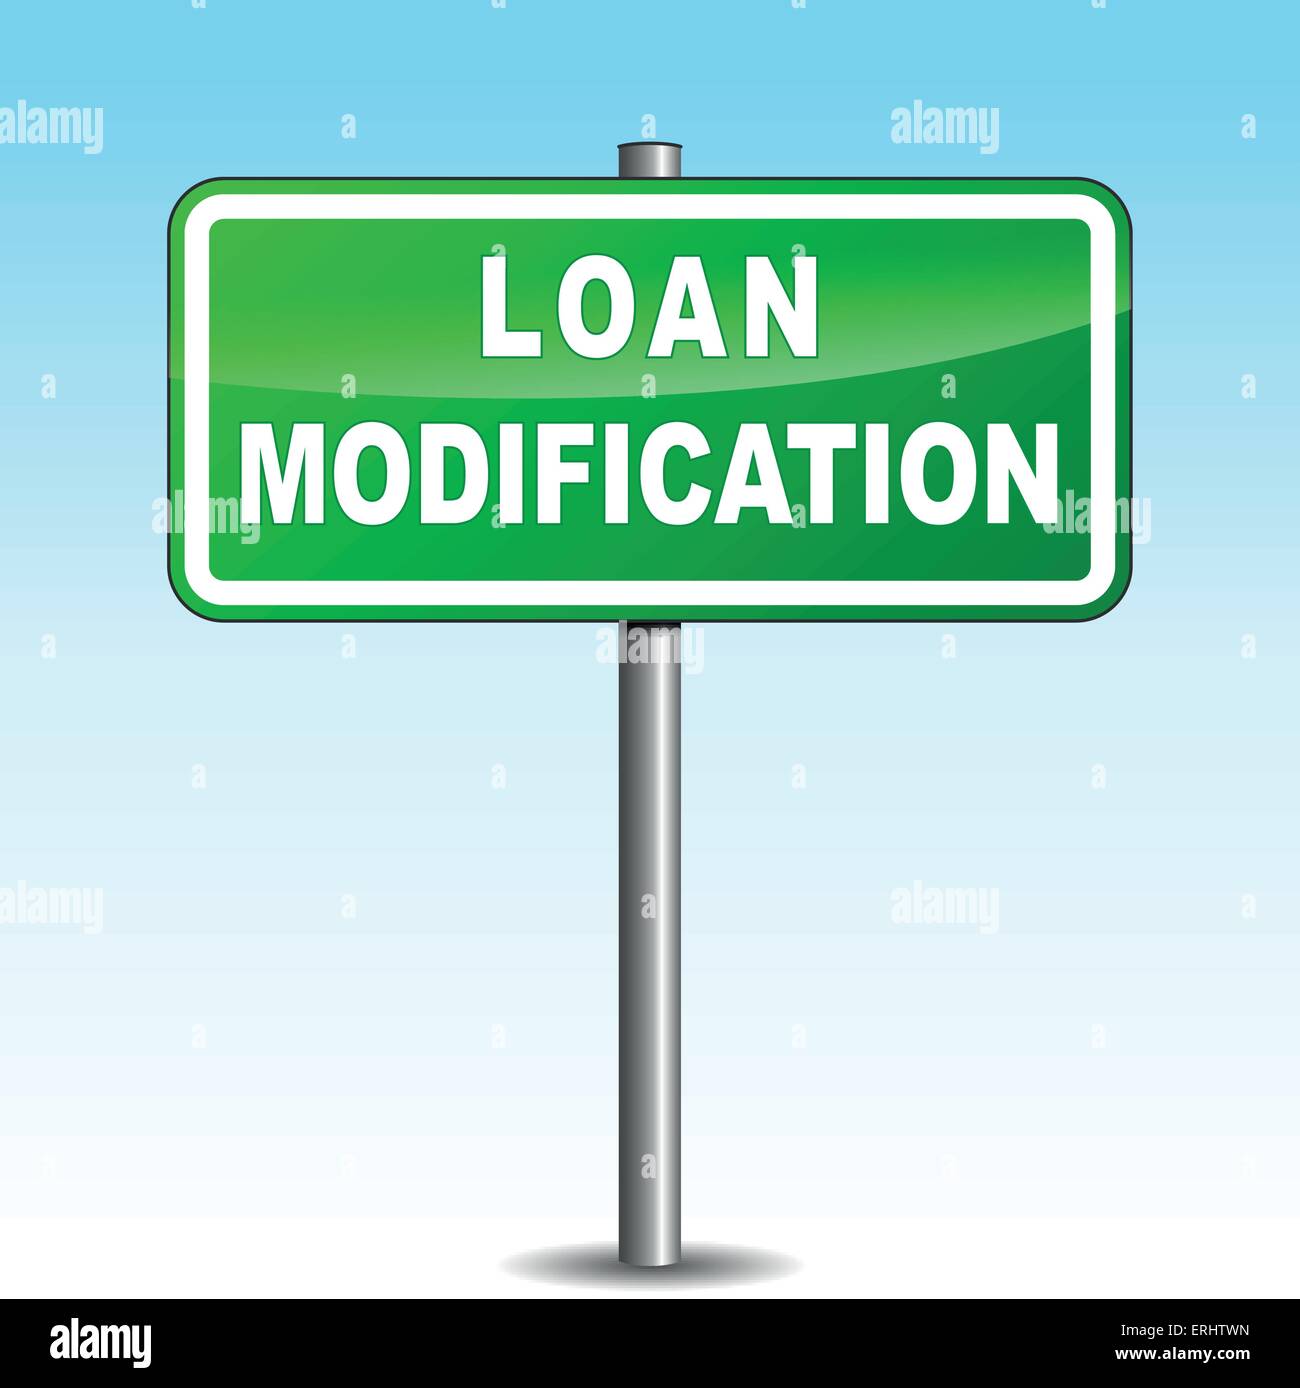 Vector illustration of loan modification signpost on sky background Stock Vector